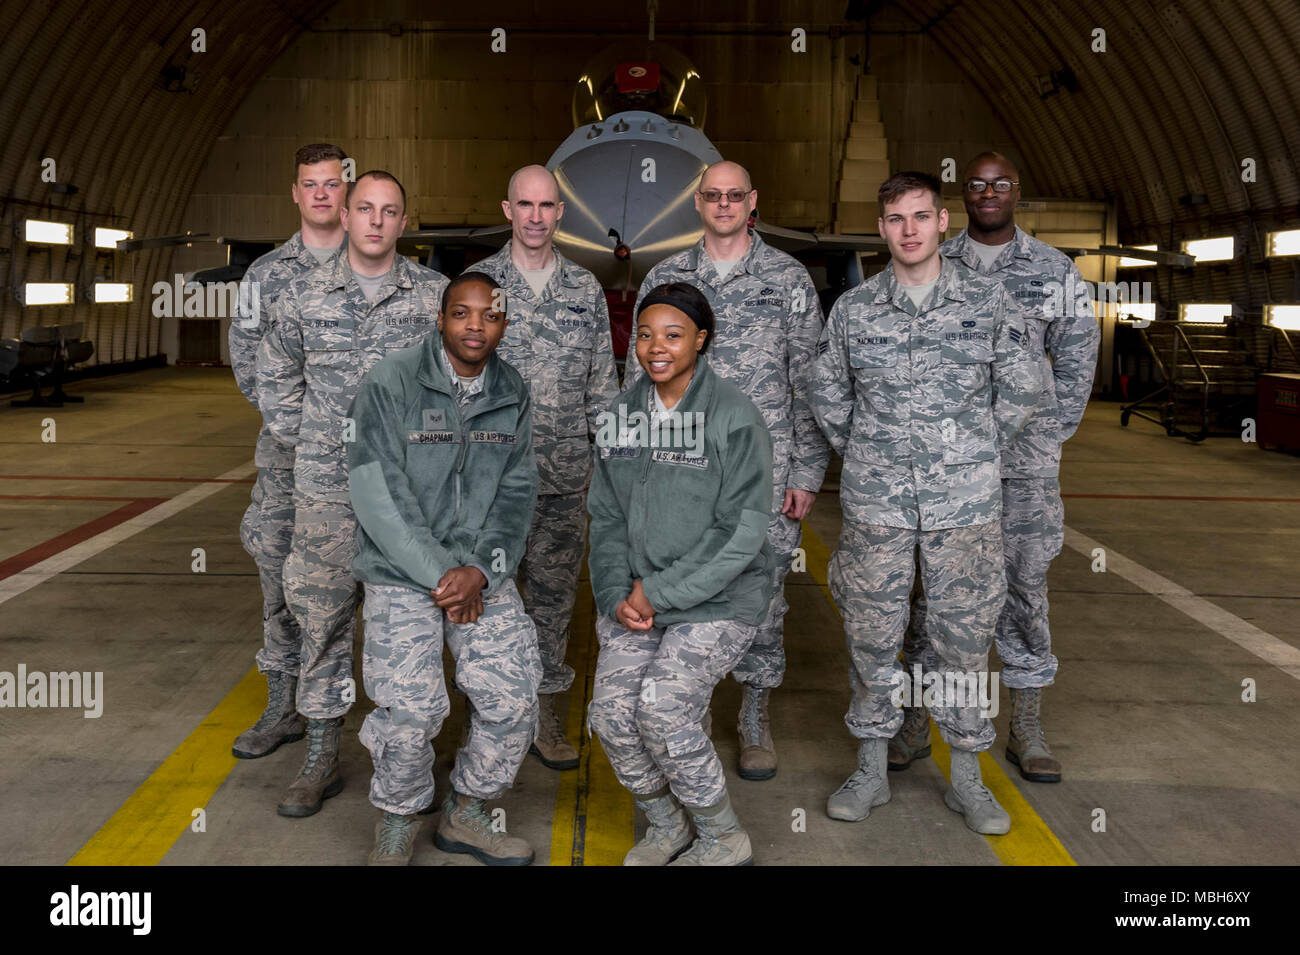 U.S. Air Force Col. Jason Bailey, 52nd Fighter Wing commander, and Chief Master Sgt. Christopher Vansile, 52nd FW acting command chief, pose with Airmen after a tour of an F-16 Fighting Falcon at Spangdahlem Air Base, Germany, April 4, 2018. The tour gave Airmen from around the 52nd FW an opportunity to meet the command team and expand their knowledge of flightline operations. Stock Photo